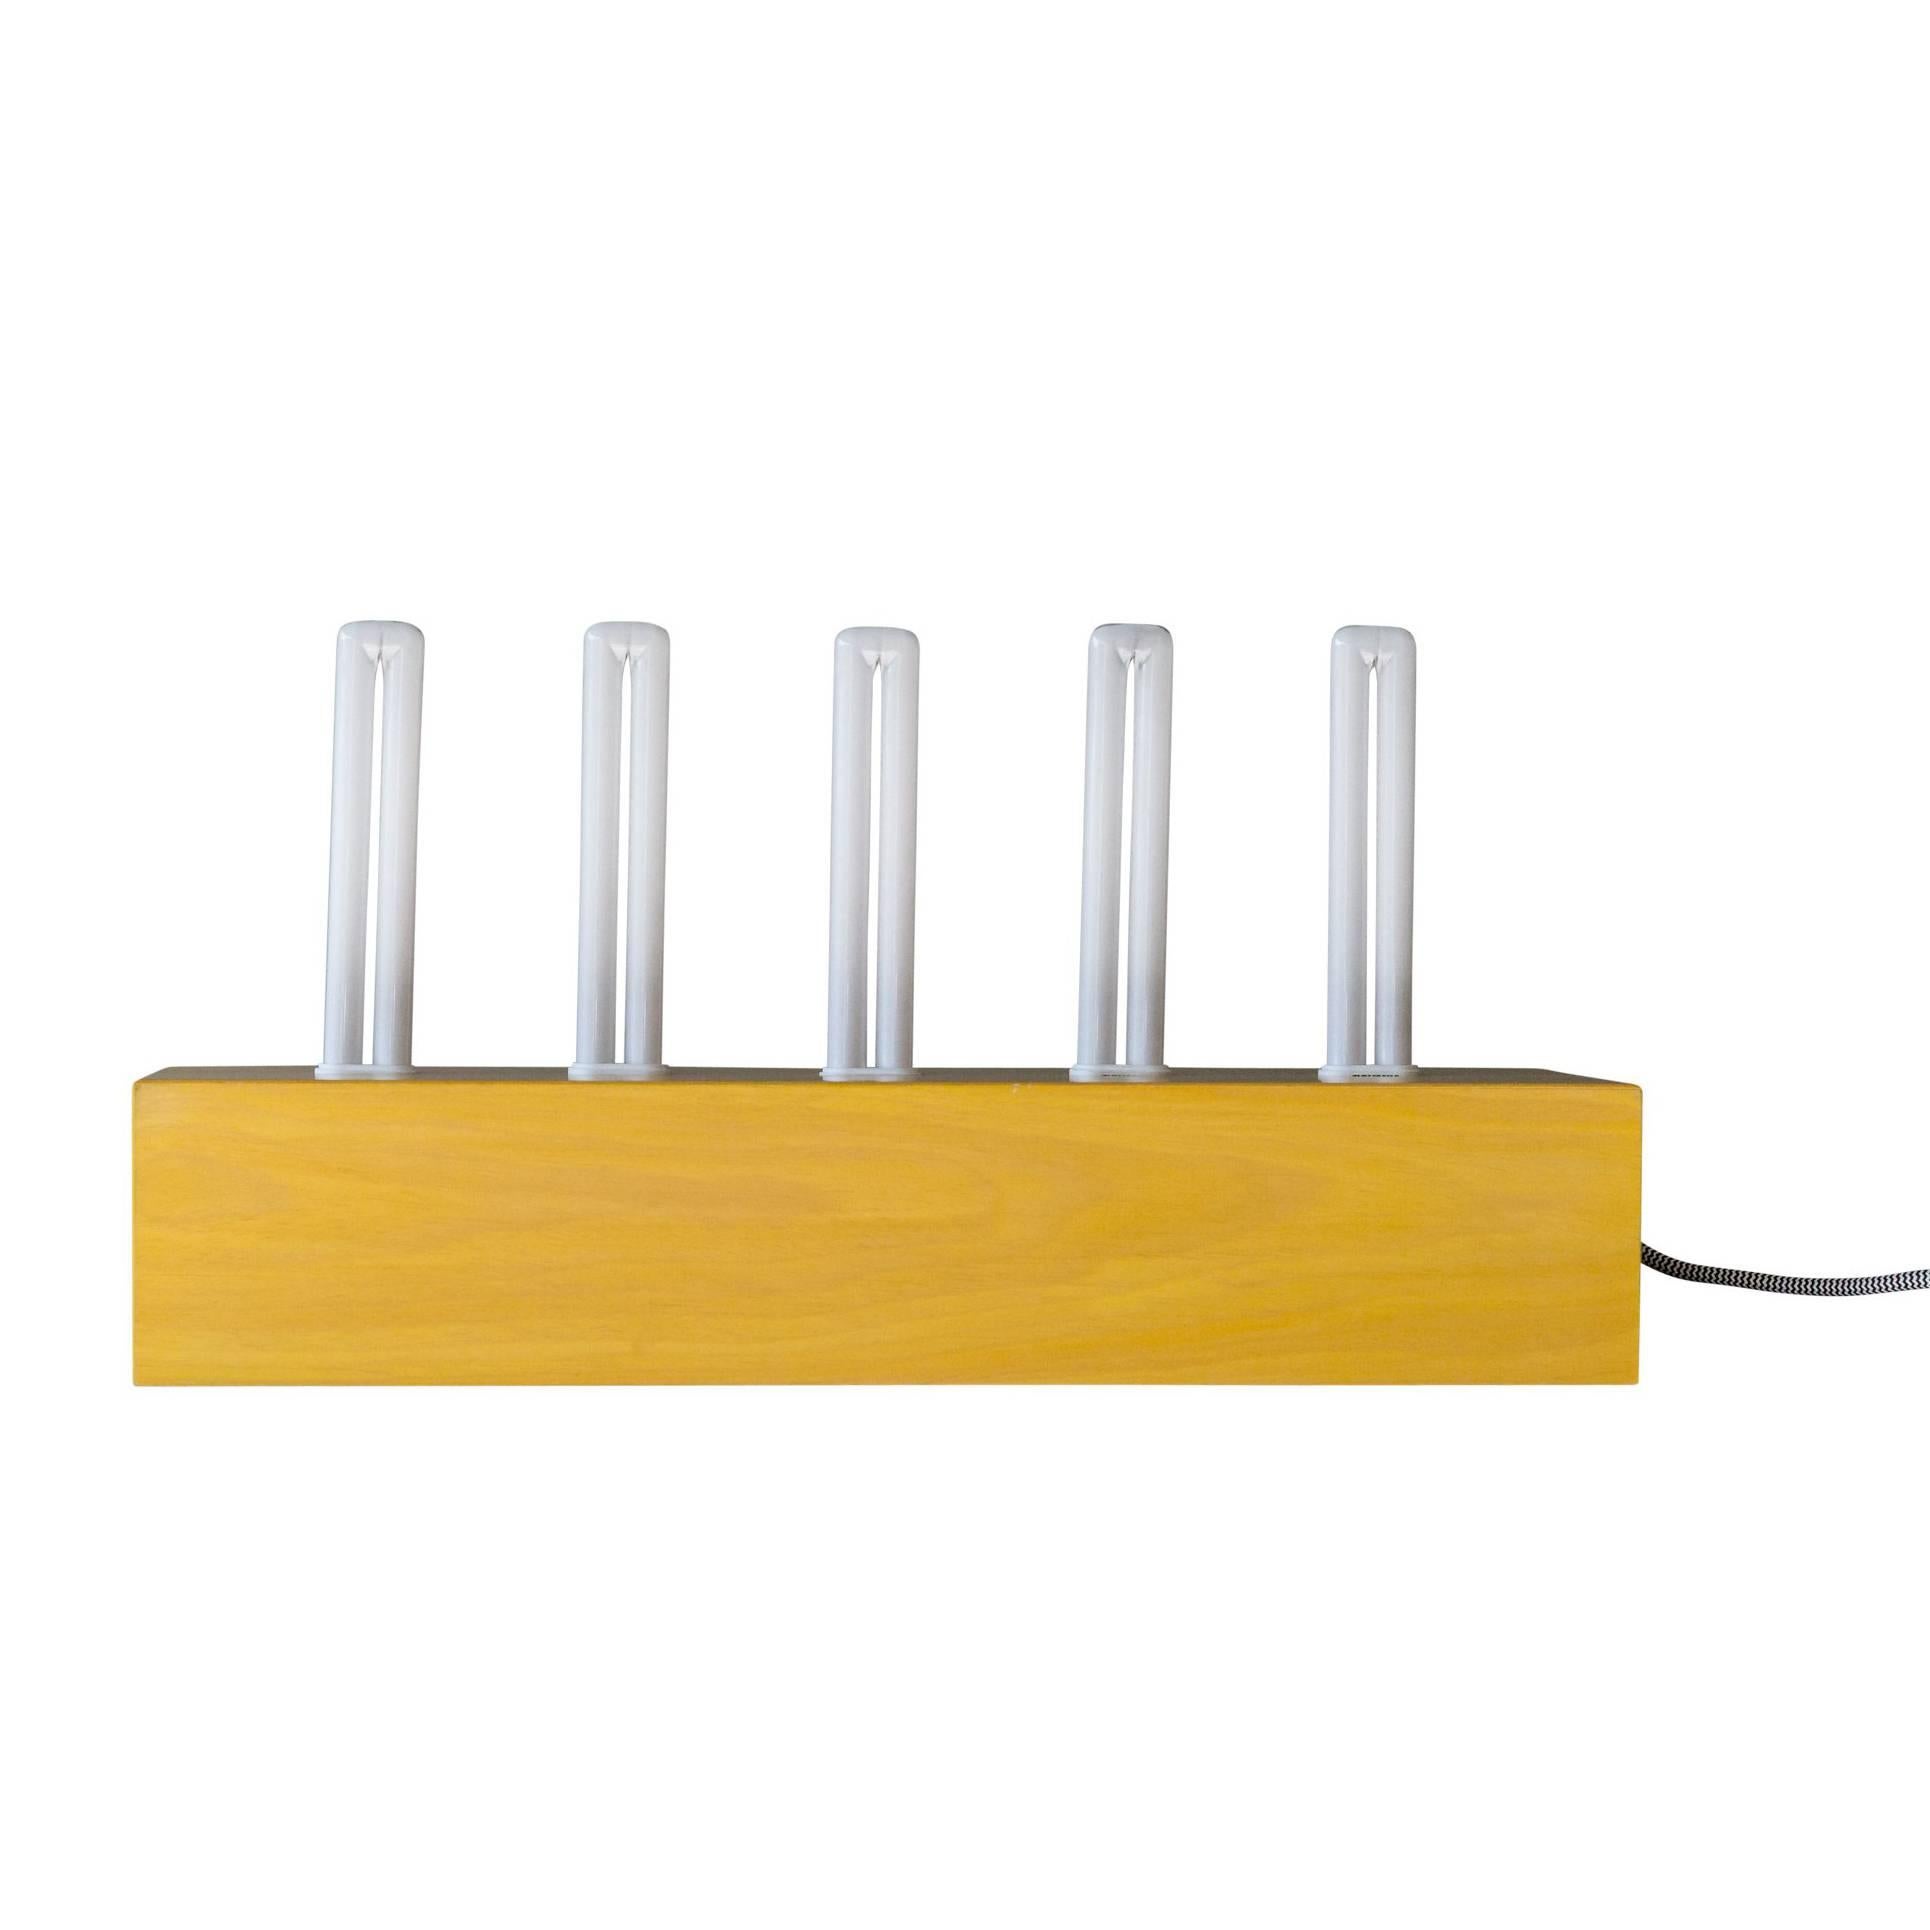 Ettore Sottsass "Pattica" Table Lamp For Sale